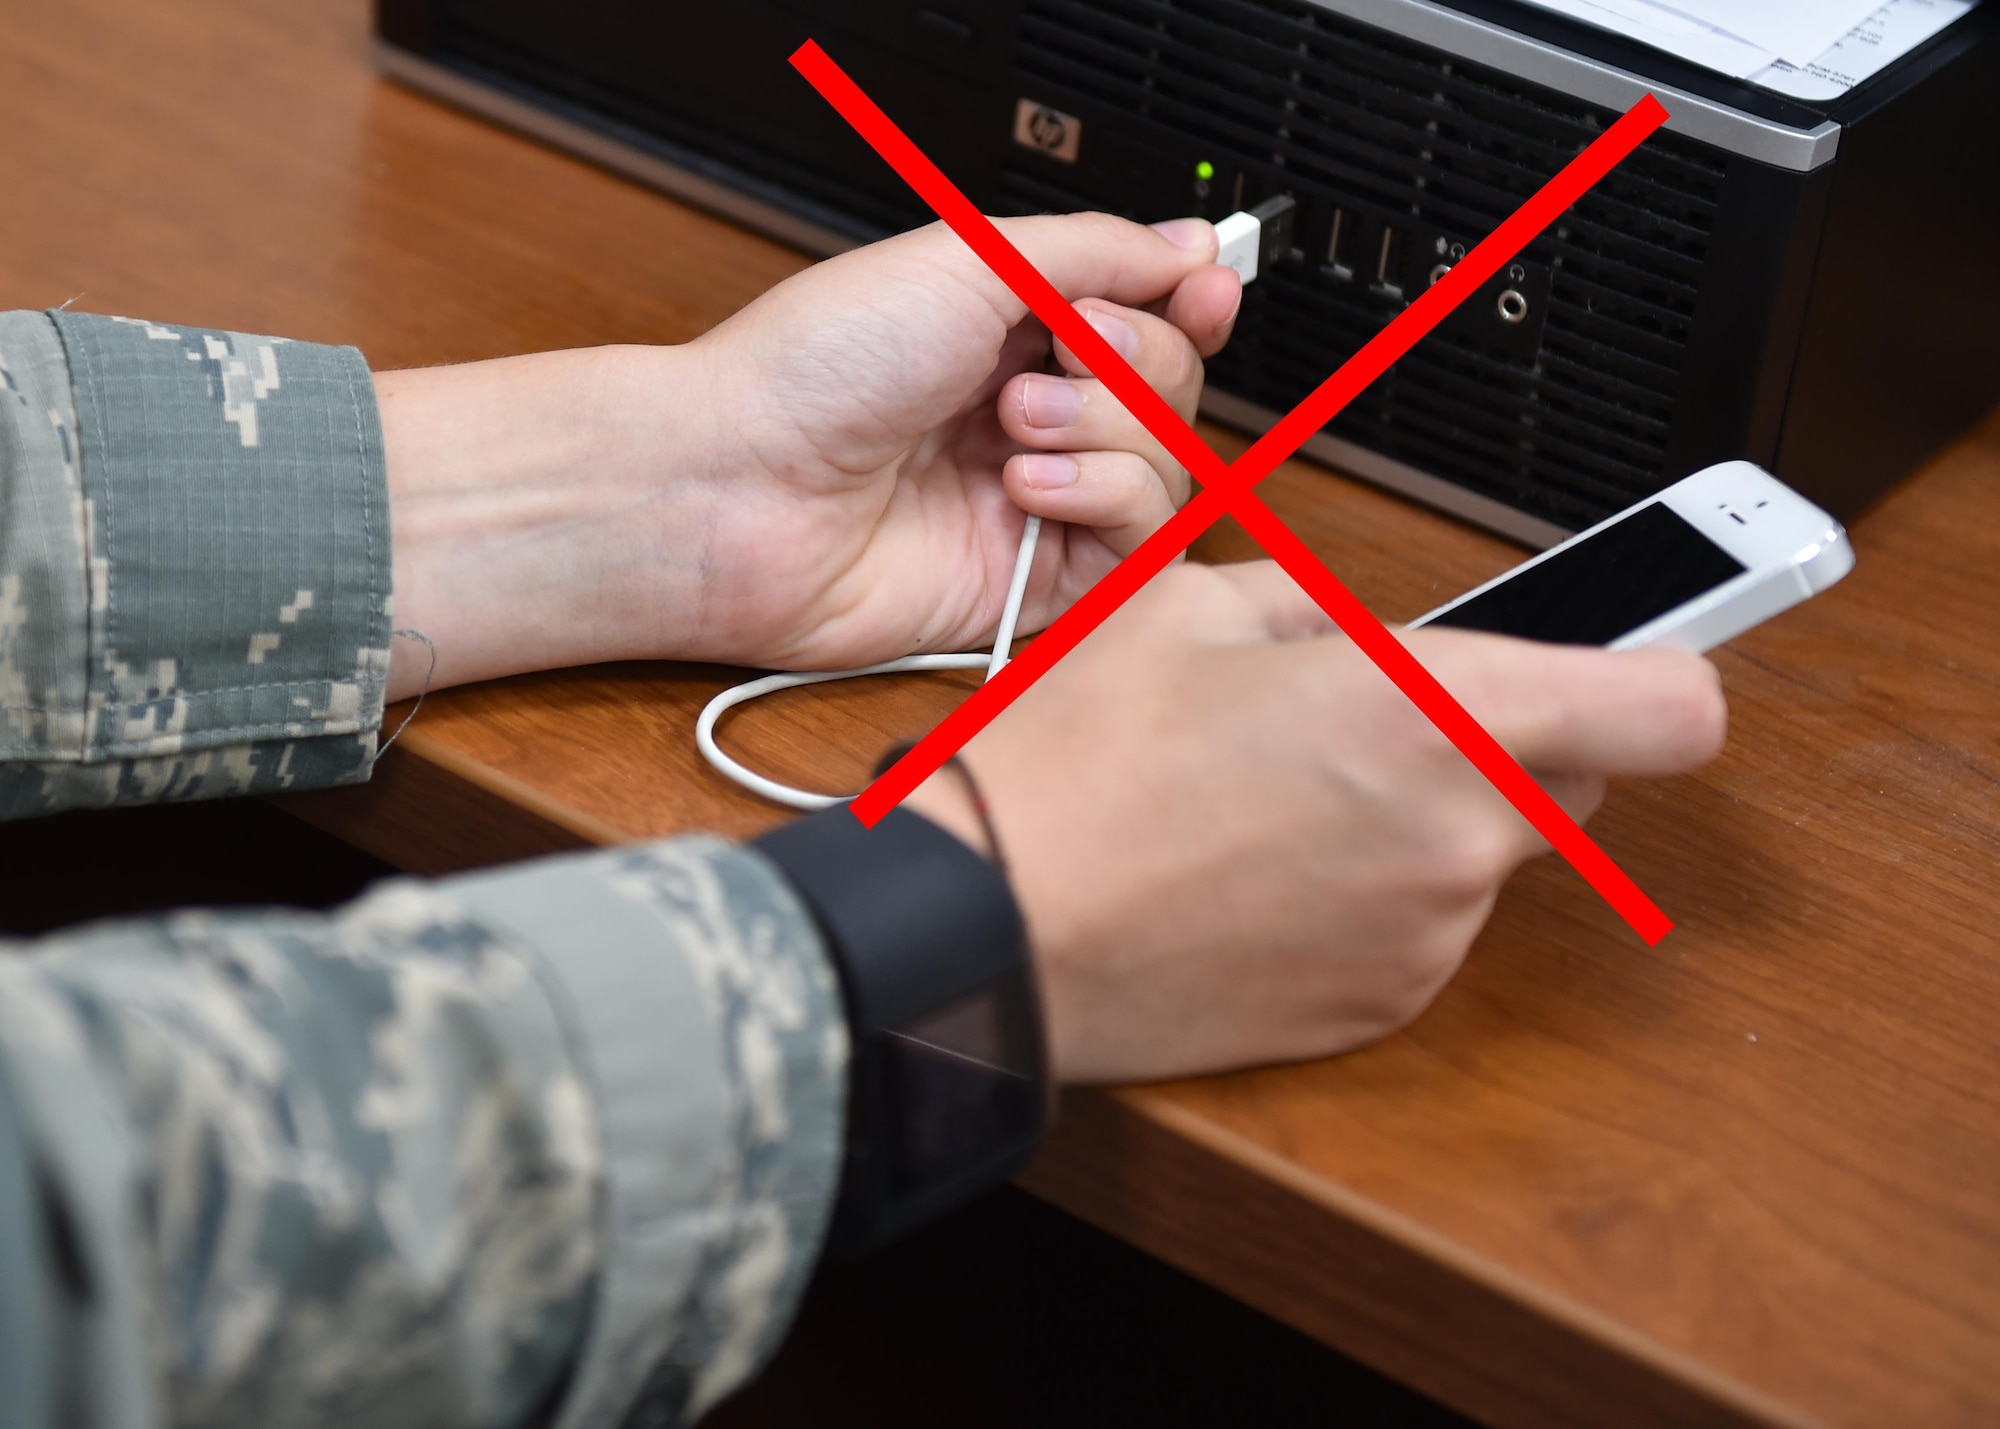 A photo illustration reminds Airmen not to plug unauthorized devices into government computers. (U.S. Air Force illustration/Tech. Sgt. James Brock)